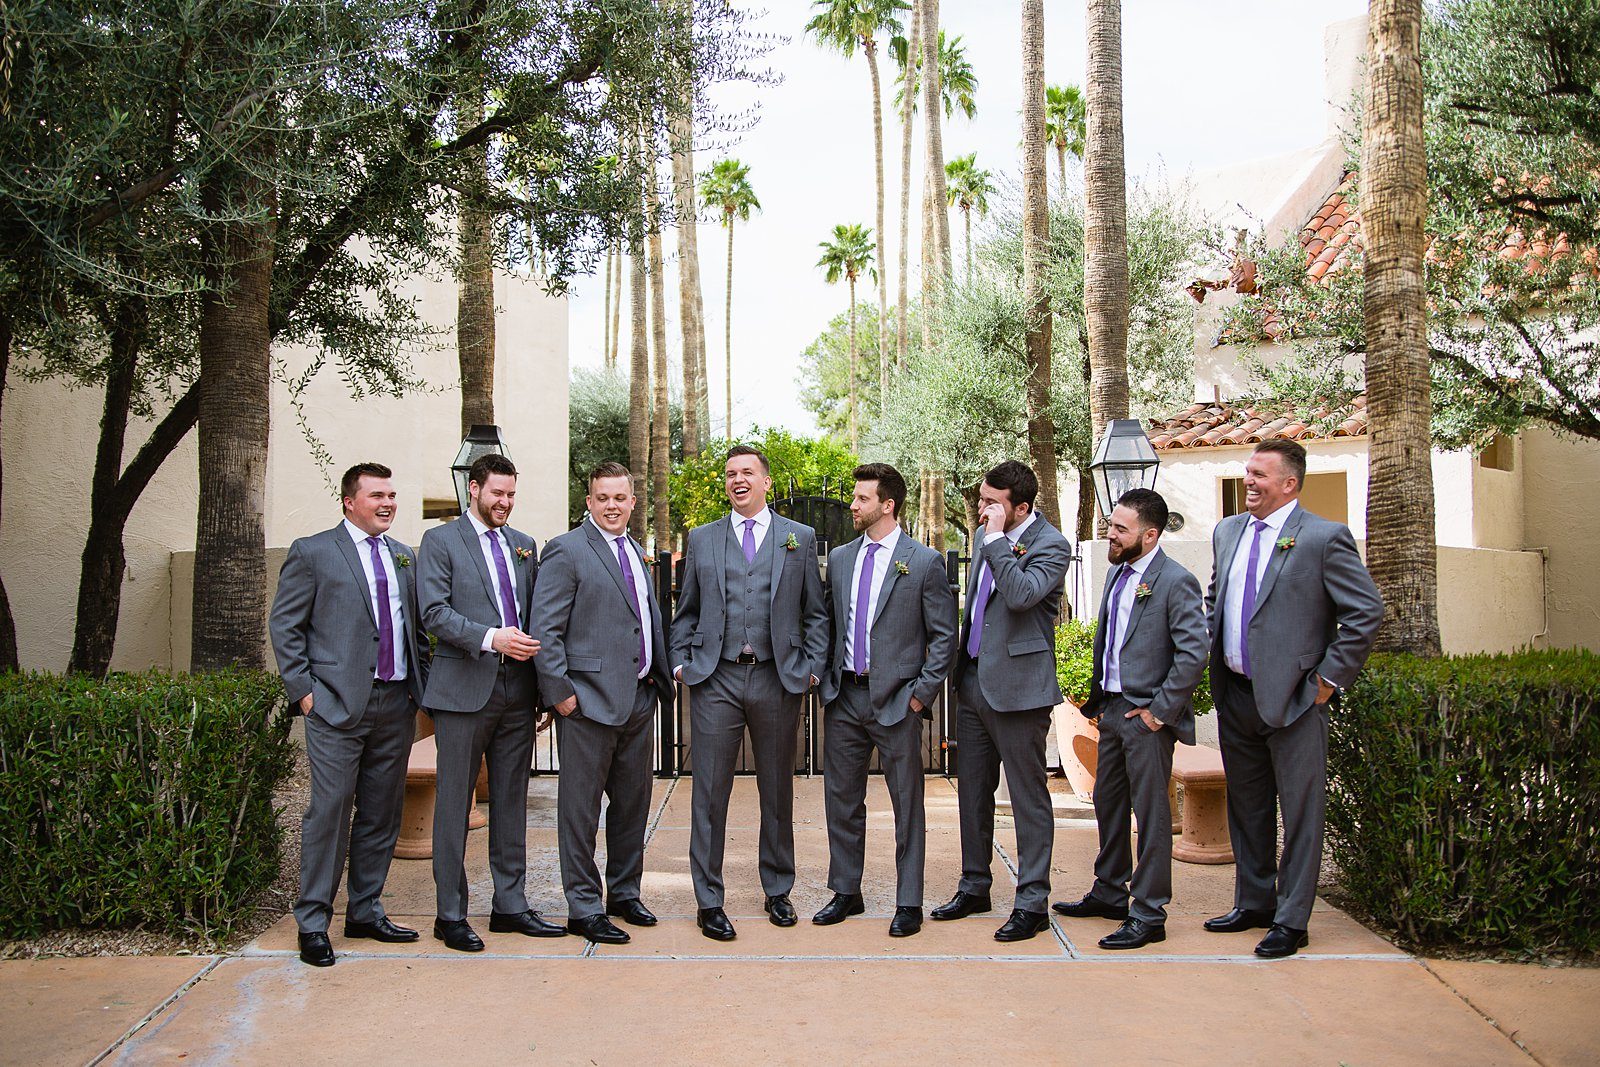 Groom and groomsmen laughing together at The Scottsdale Resort at McCormick Ranch wedding by Scottsdale wedding photographer PMA Photography.